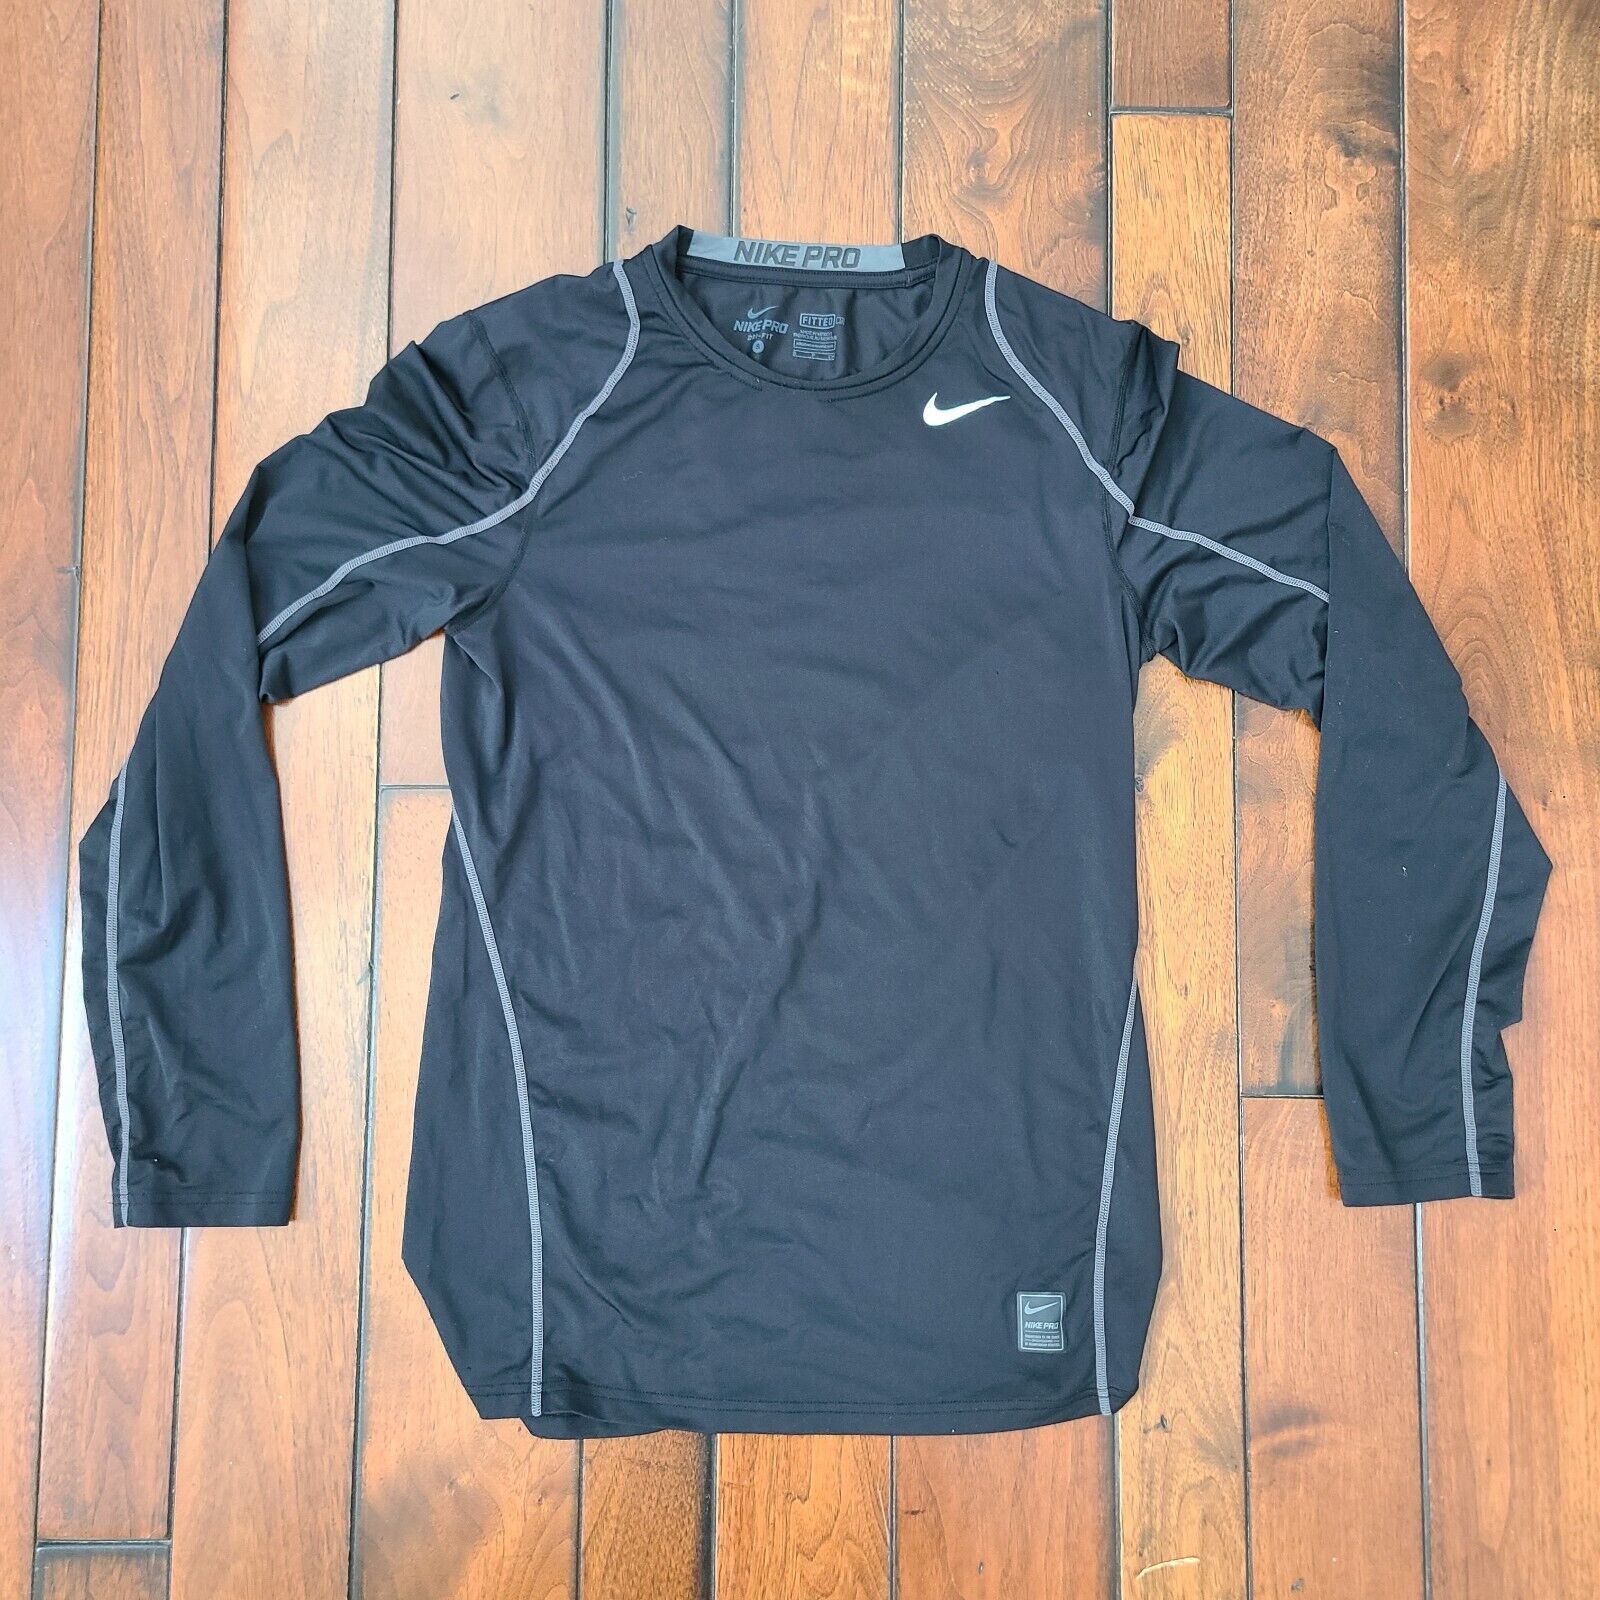 Primary image for NIKE Pro Long Sleeve T Shirt Fitted DriFit Pro Cool Stretch Black Men's Small S